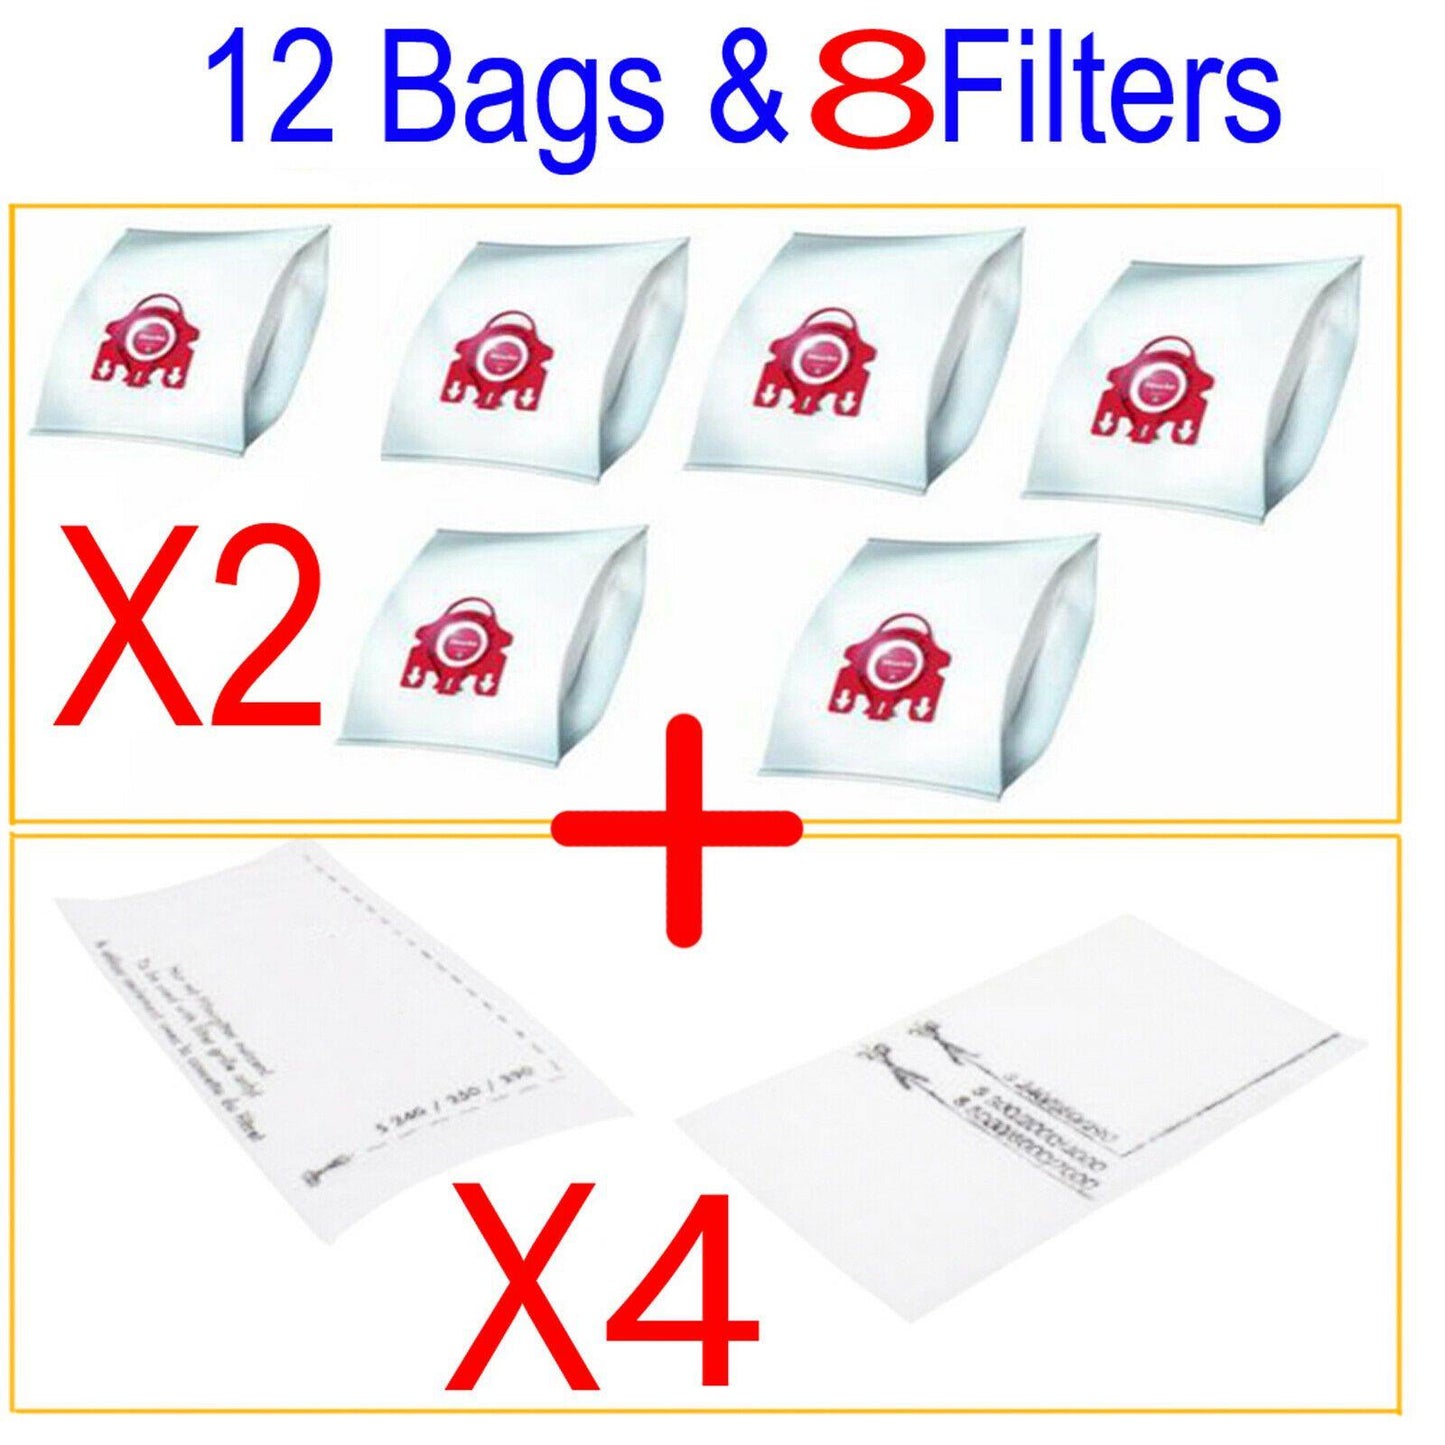 12x Synthetic Dust Bags+8x Filters For Miele FJM Hyclean 3D COMPACT C1 C2 S4 Sparesbarn